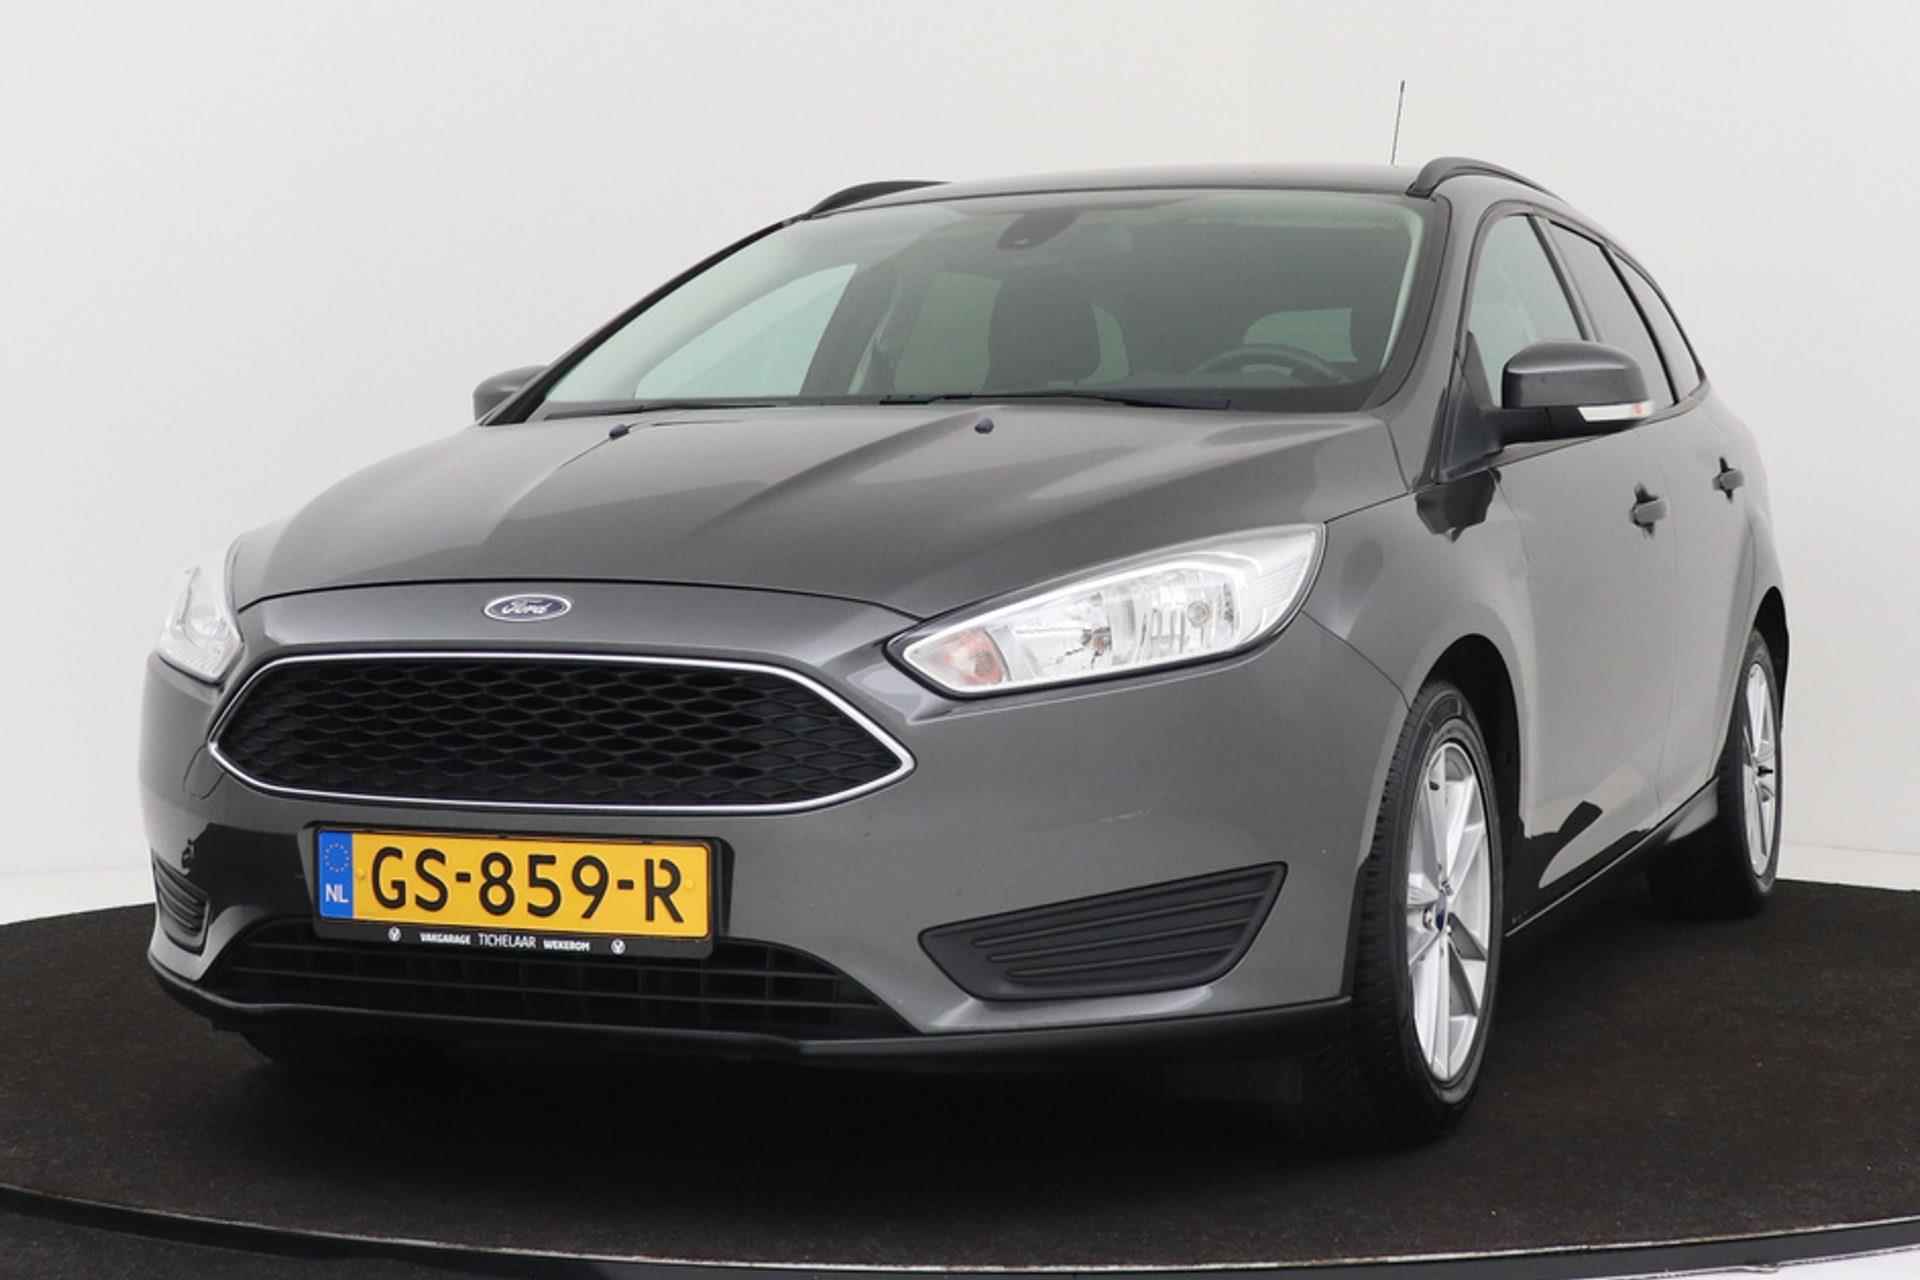 Ford Focus Wagon 1.0 Trend Edition | Org NL | Volledig Ond. | Airco | Cruise Control | - 13/36